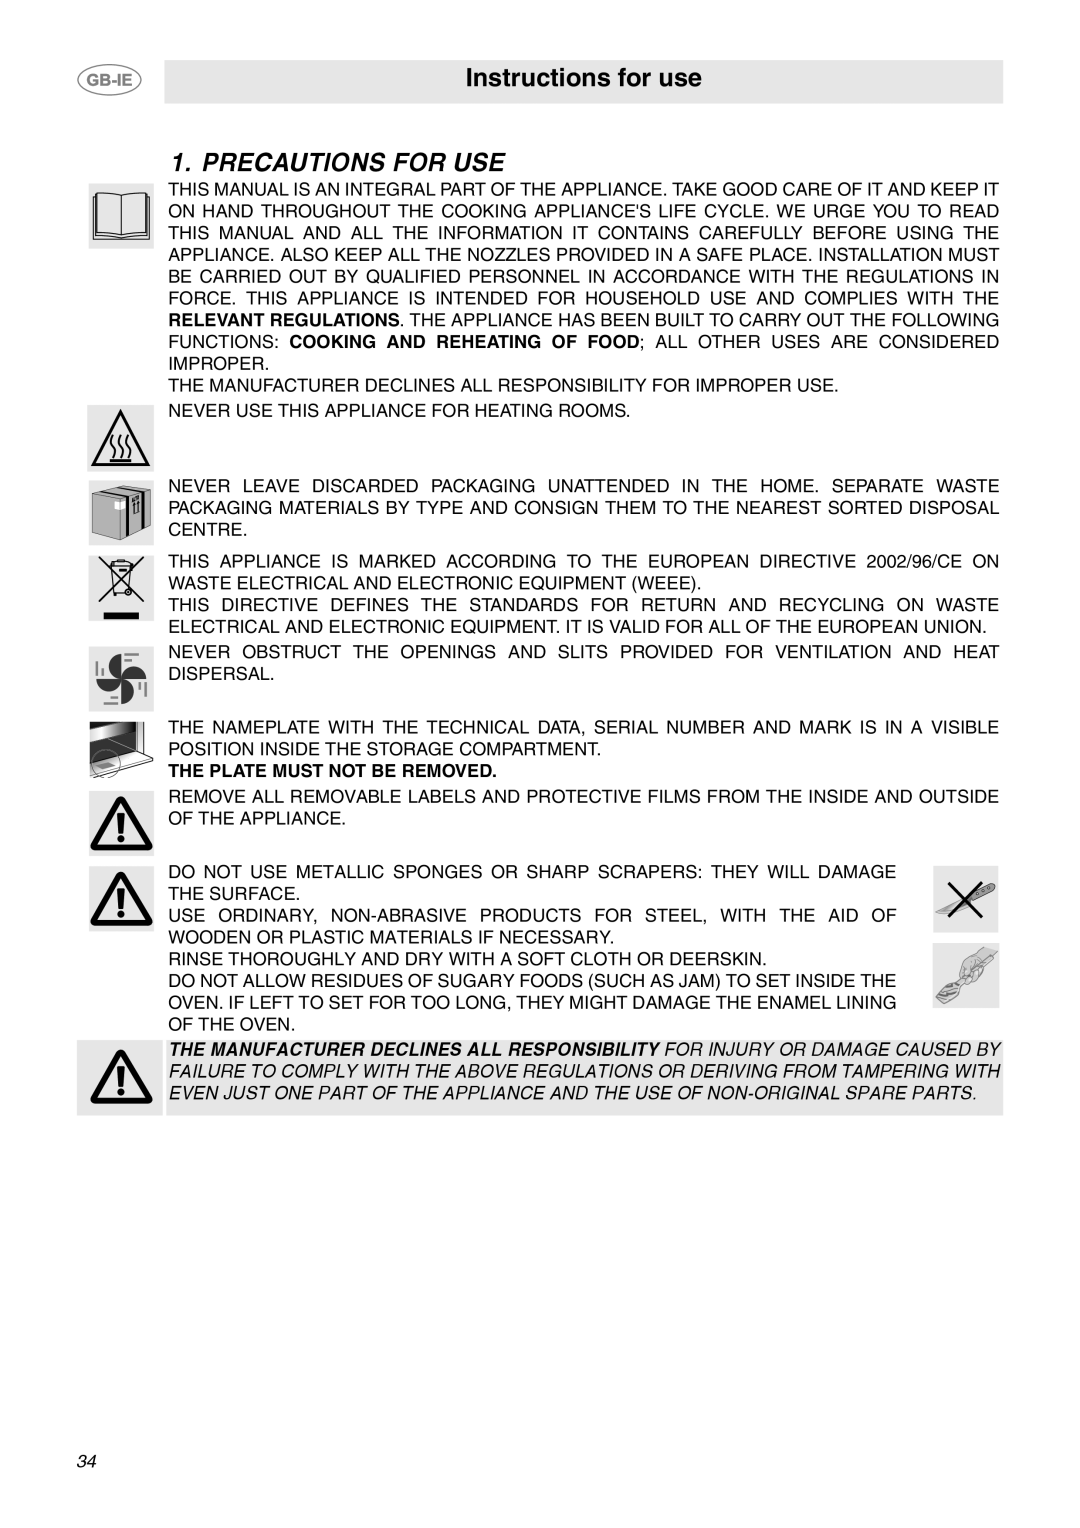 Smeg CE92IPX manual Instructions for use, Precautions For Use, The Plate Must Not Be Removed 